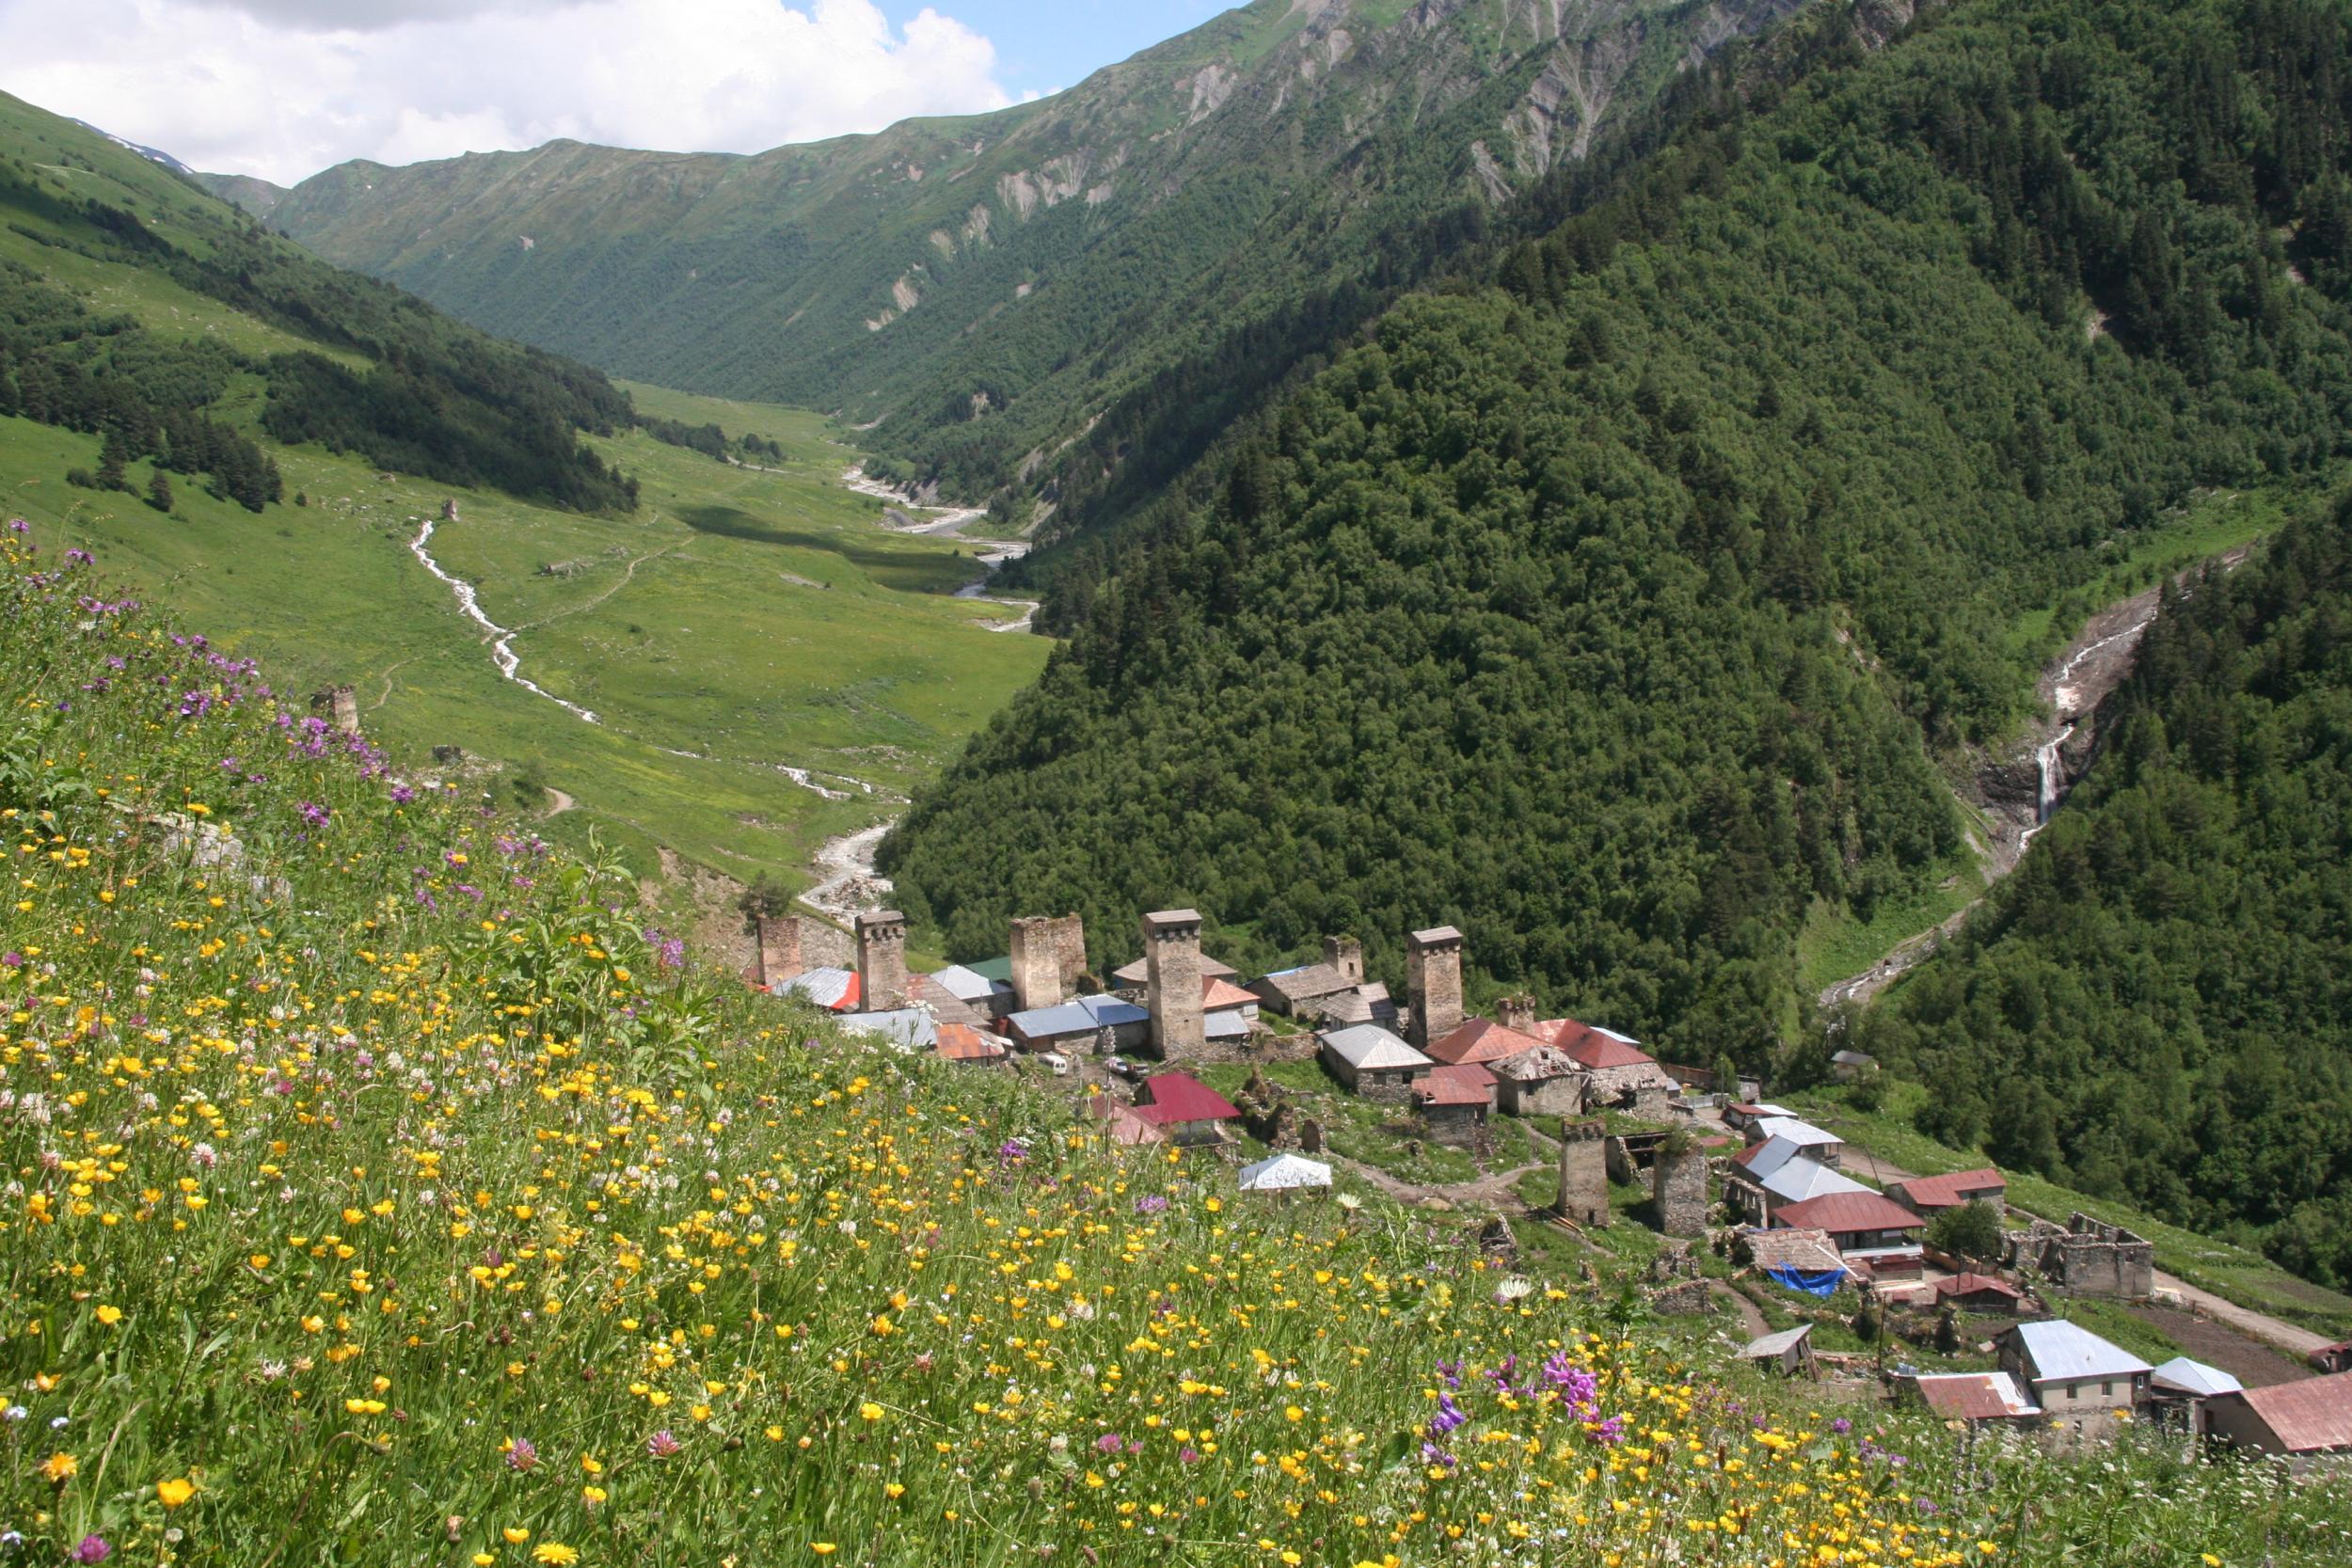 The route goes past remote villages including Adishi